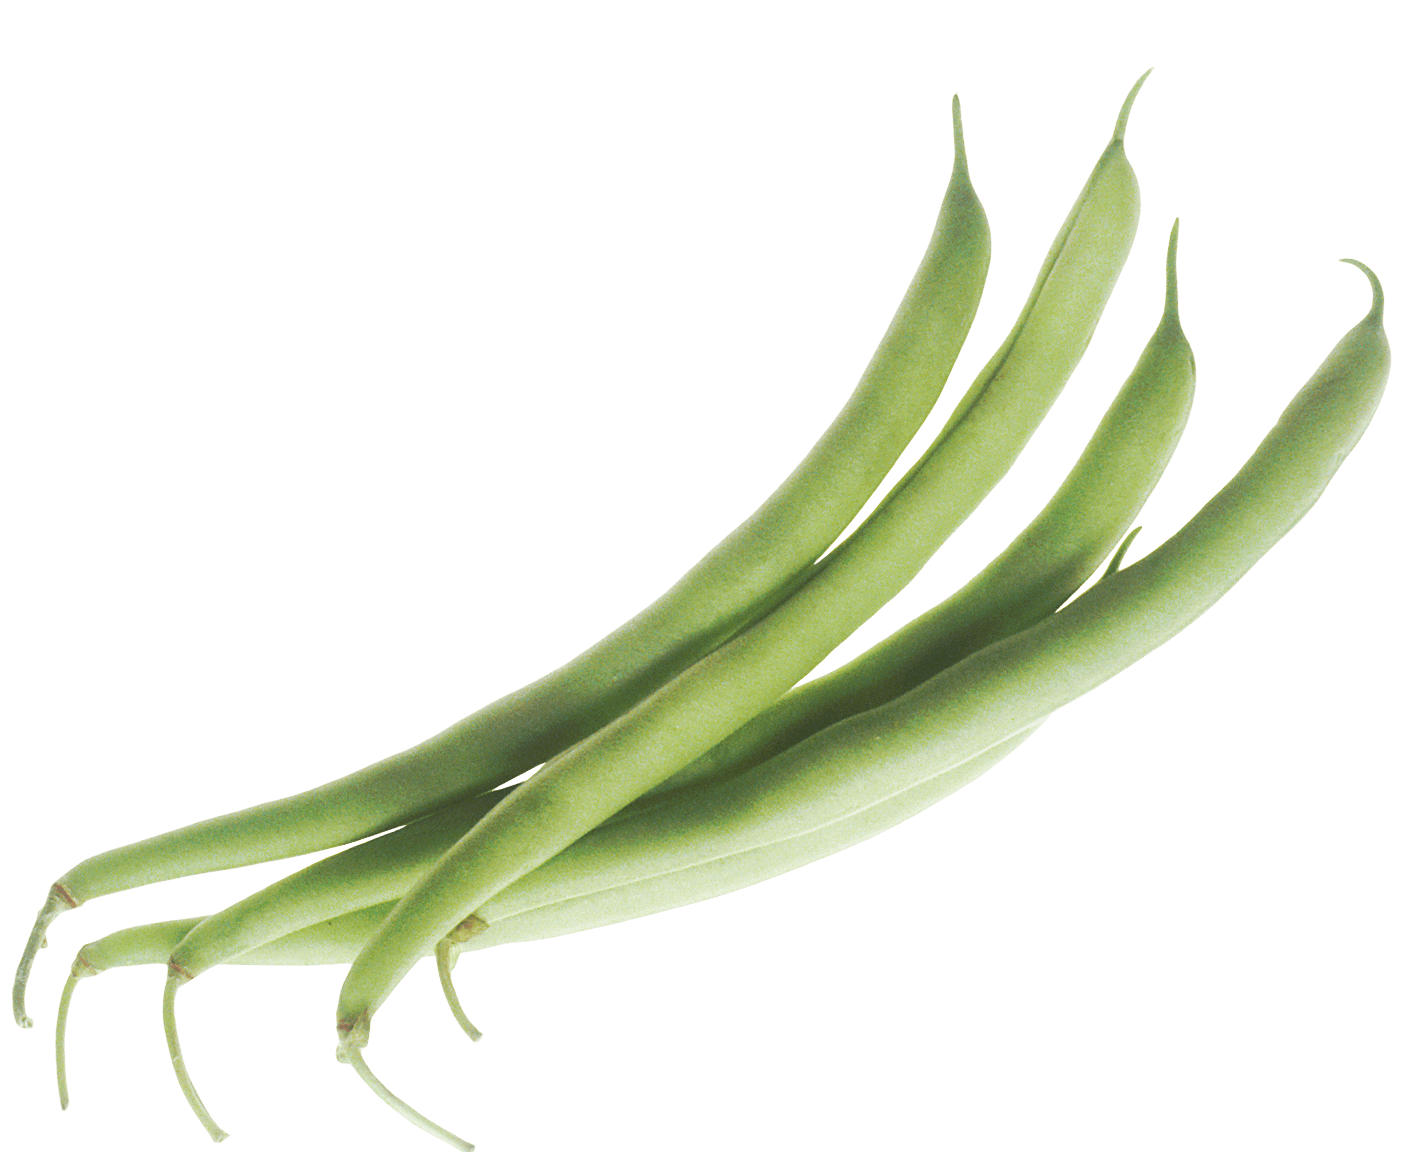 Beans Png